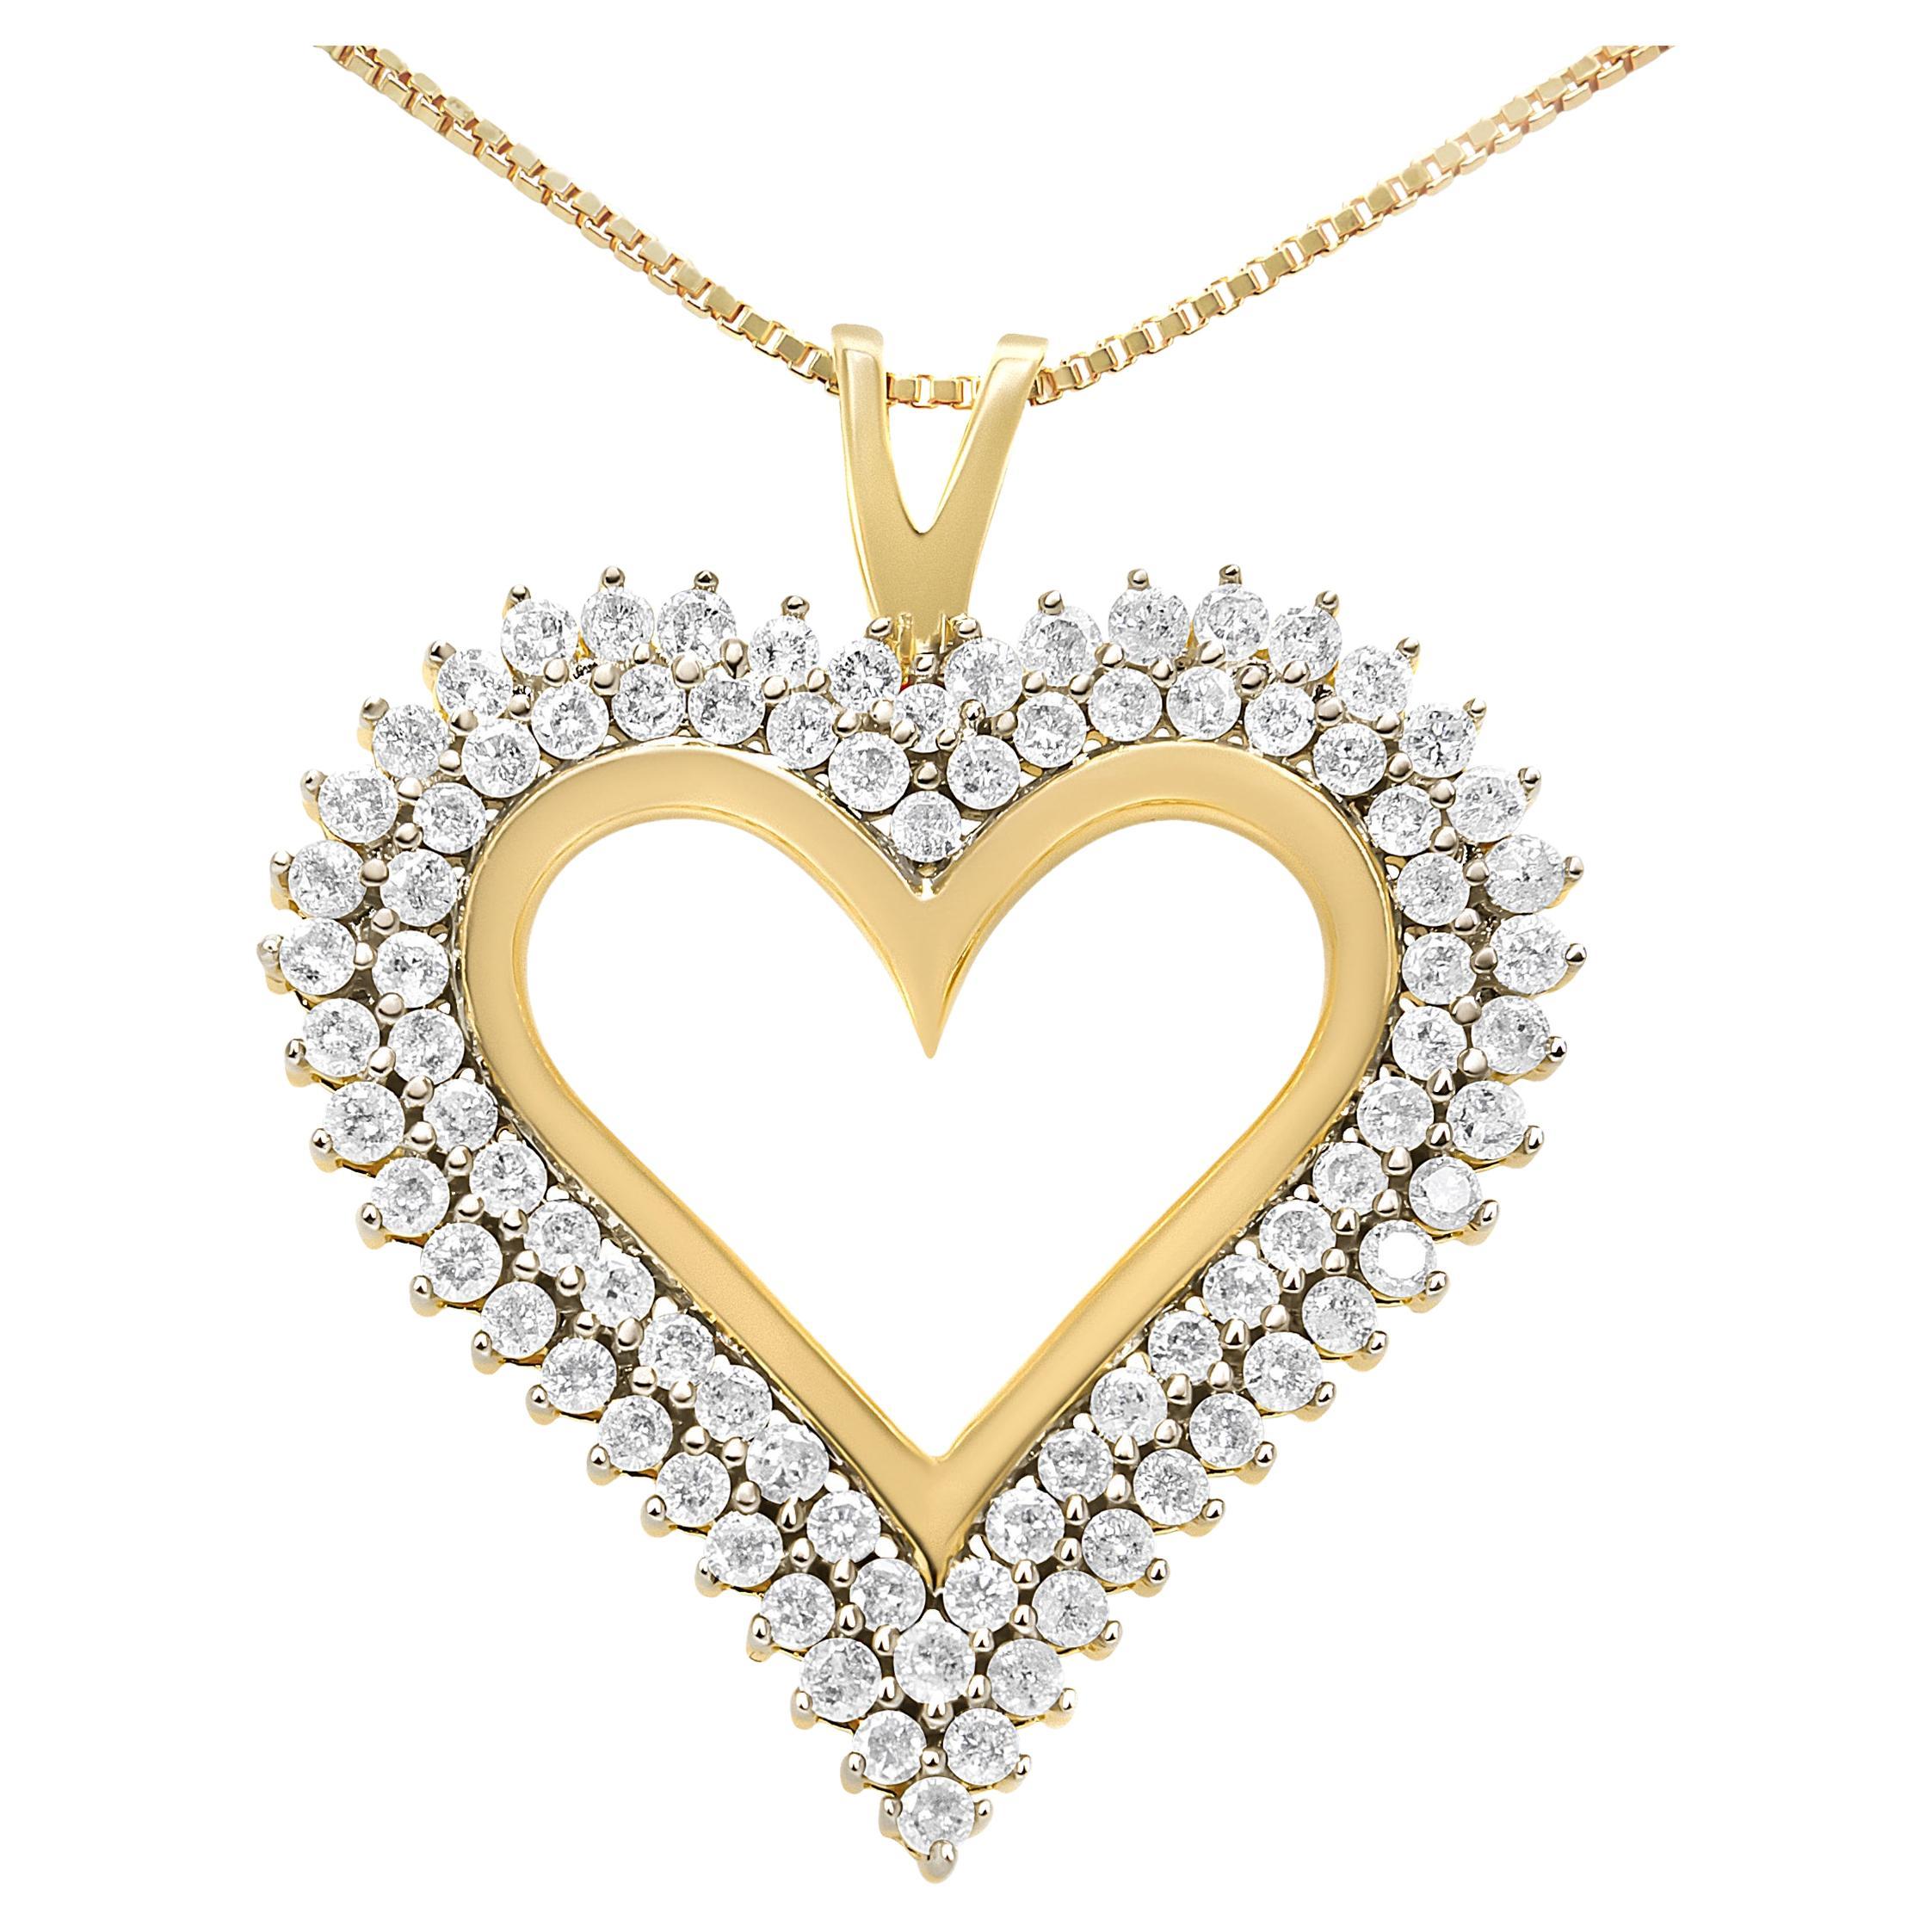 10K Yellow Gold Plated Sterling Silver 2.0 Carat Diamond Heart Pendant Necklace